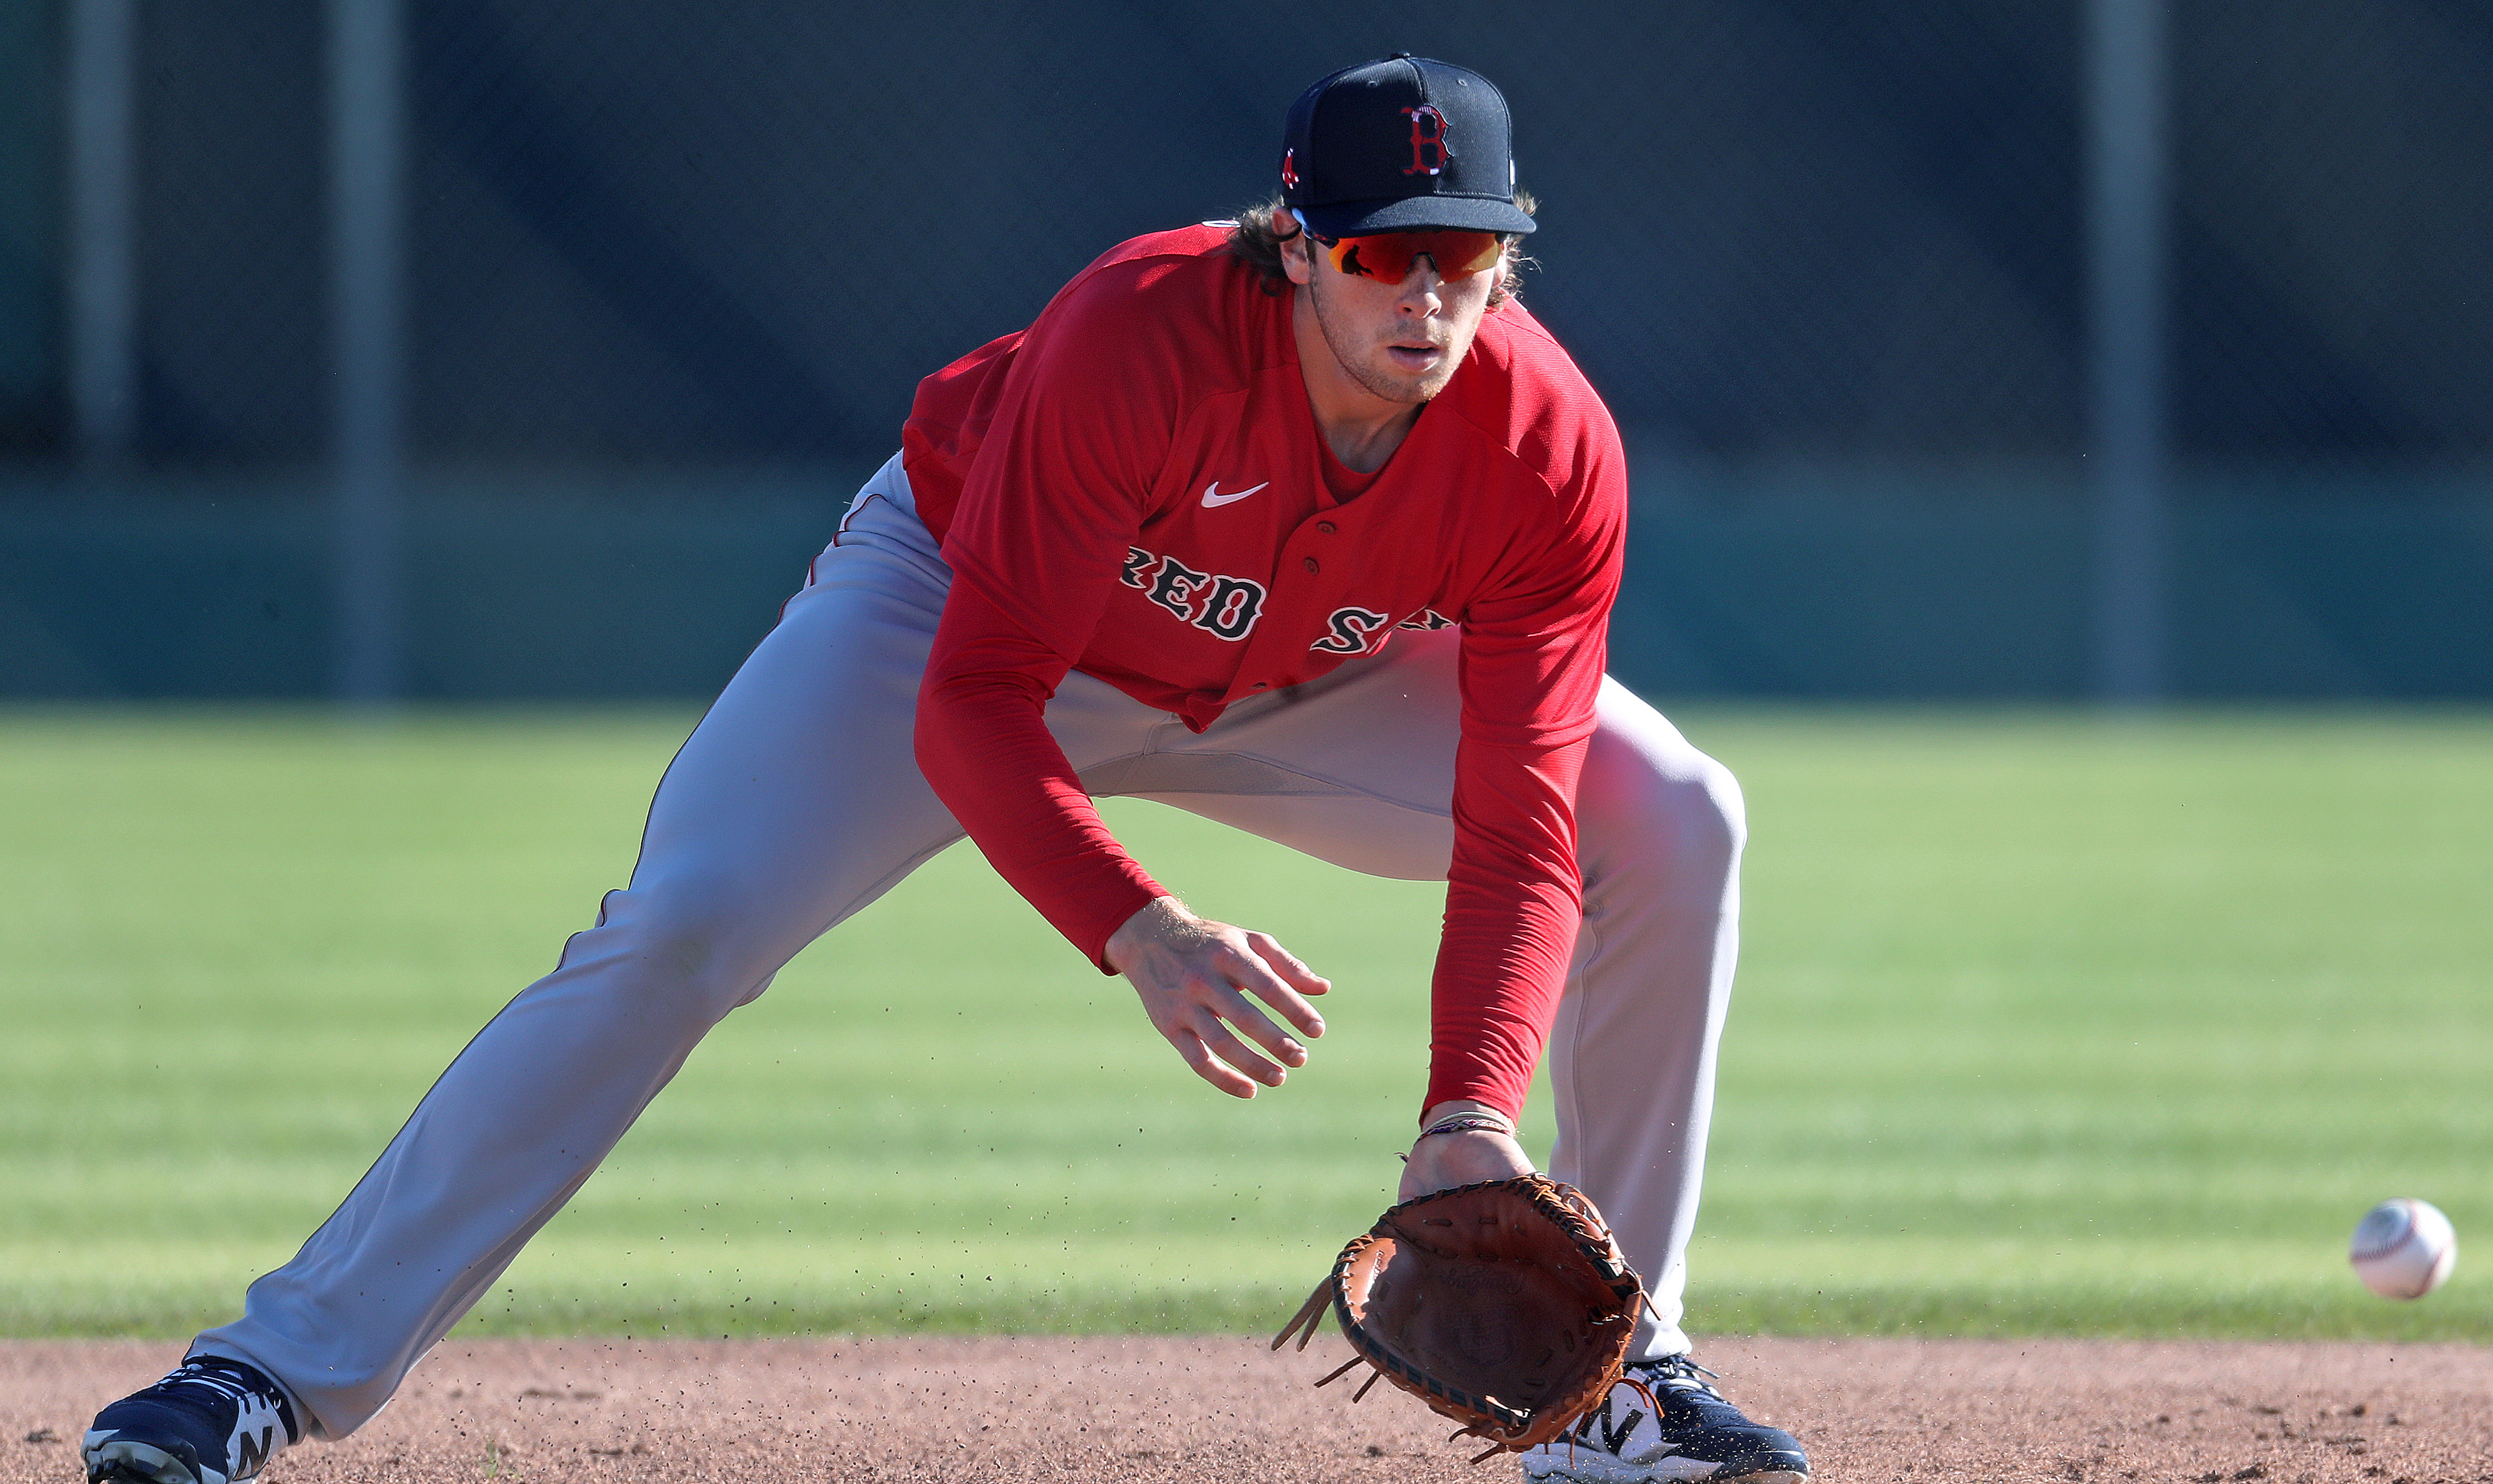 Red Sox prospect Triston Casas focuses on honing skills in Worcester